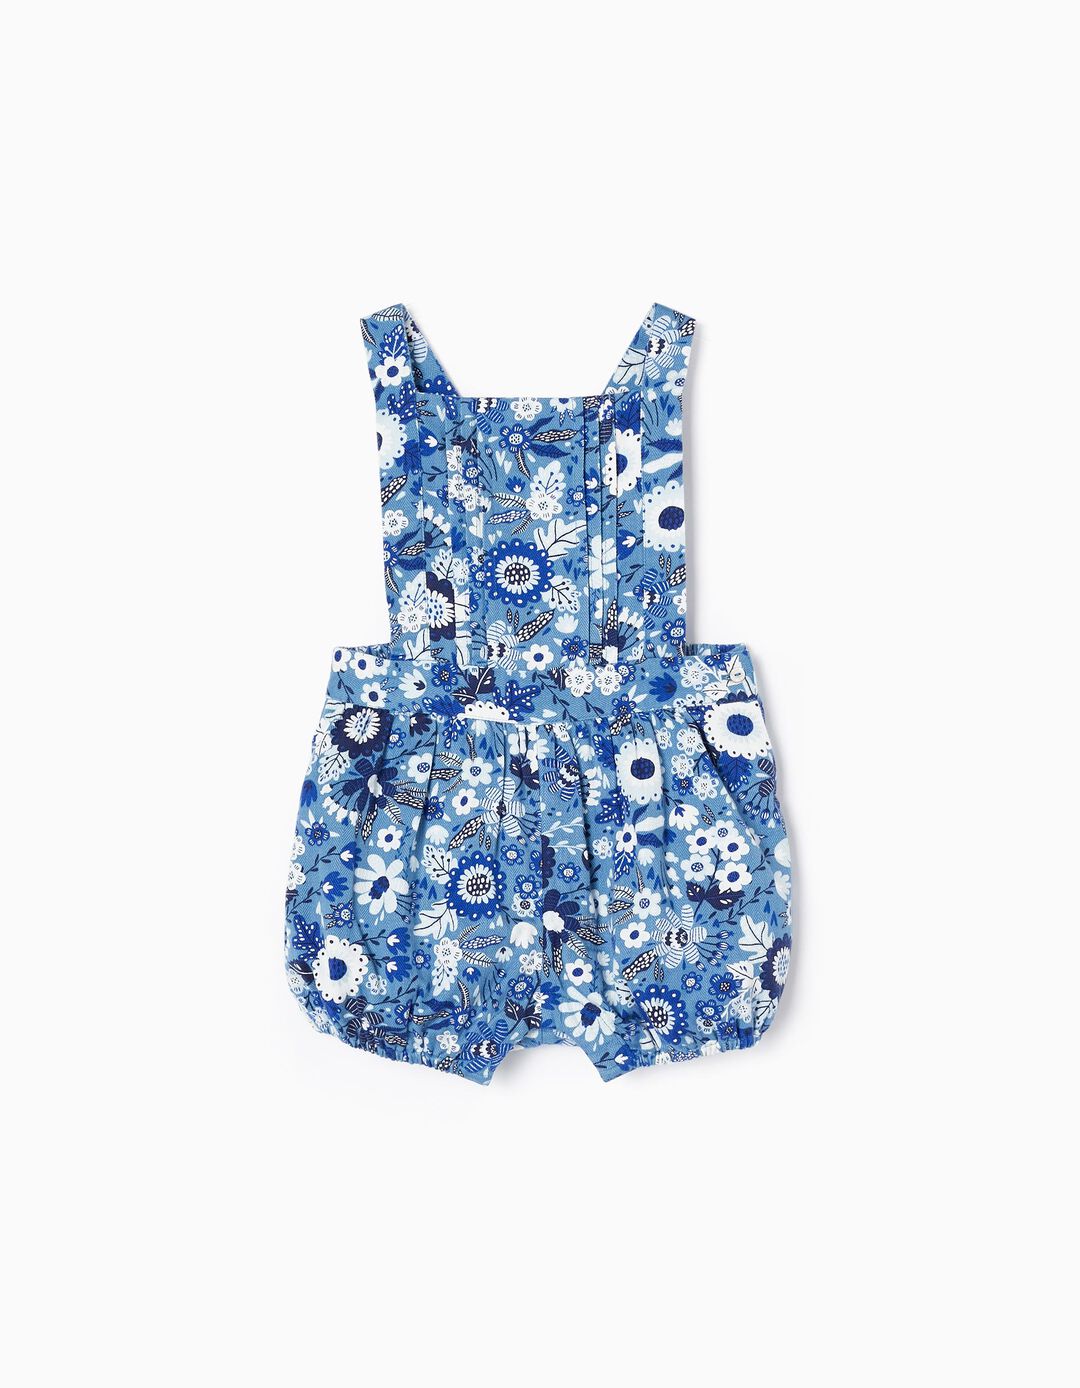 Cotton Jumpsuit with Floral Motif for Baby Girls, Blue/White